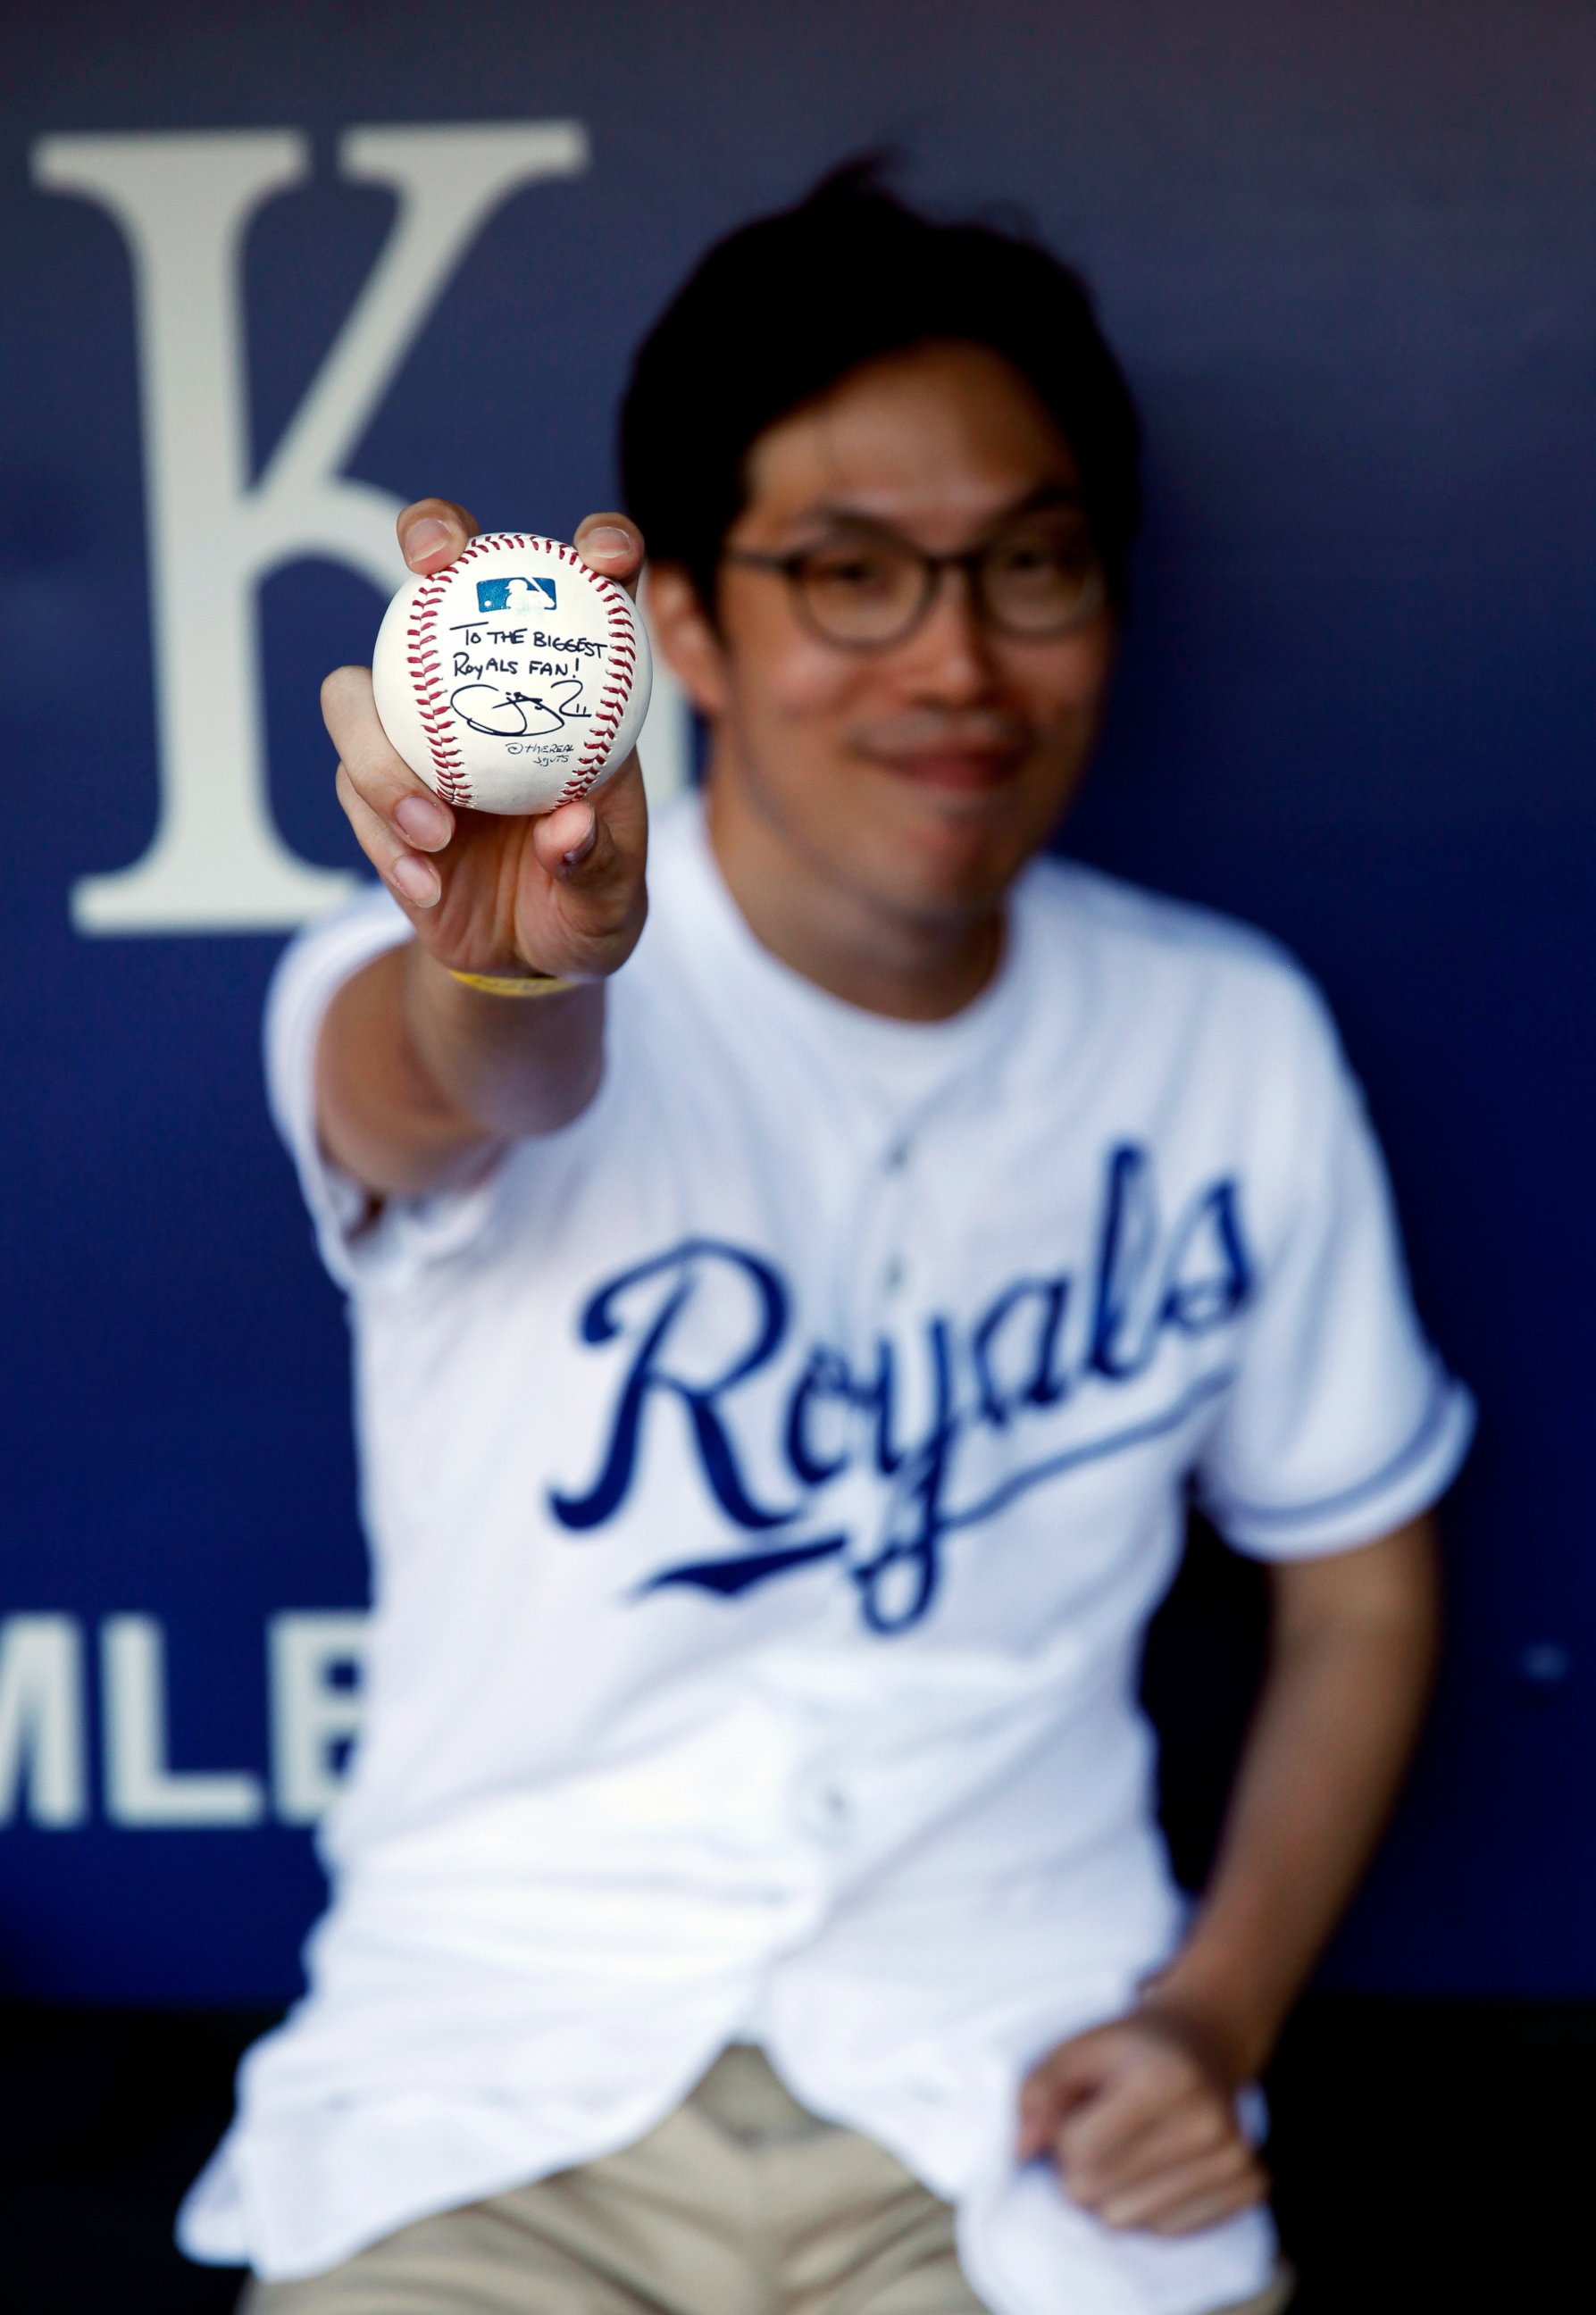 PHOTO: Kansas City Royals fan Sungwoo Lee of Korea shows of a signed baseball prior to the game against the Oakland Athletics at Kauffman Stadium, Aug. 11, 2014 in Kansas City, Mo.